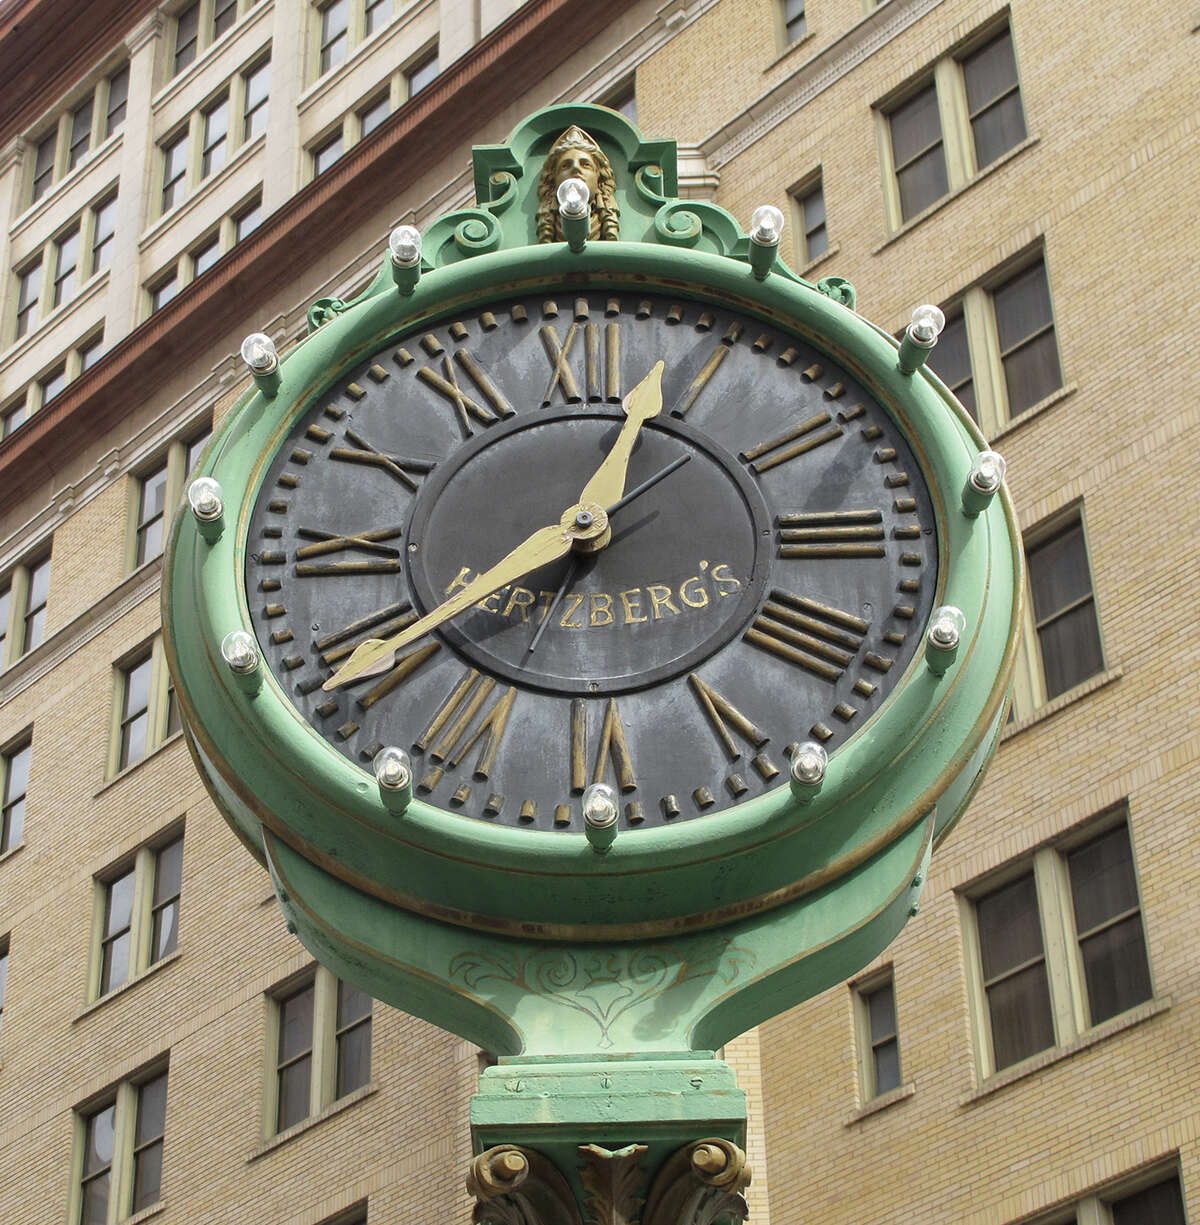 The Hertzberg Clock stands at the corner of Houston and St. Mary's streets. In 1878, Eli Hertzberg installed the clock outside his jewelry shop on Commerce Street. When the shop moved to Houston and St. Mary's streets in 1910, the clock followed.